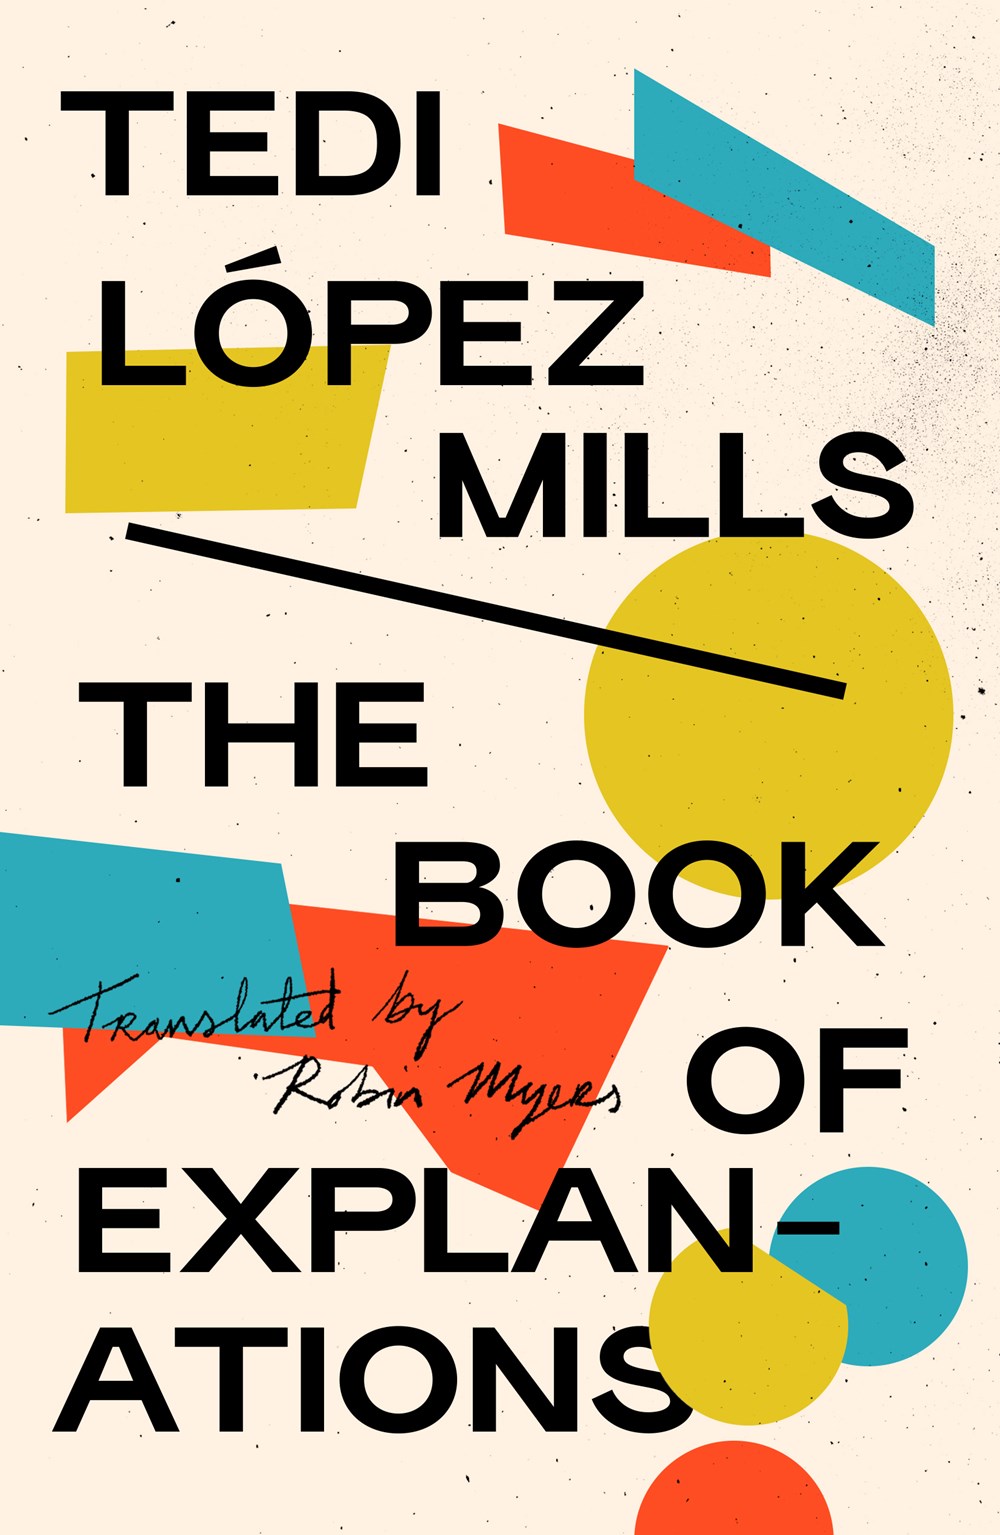 The Book of Explanations